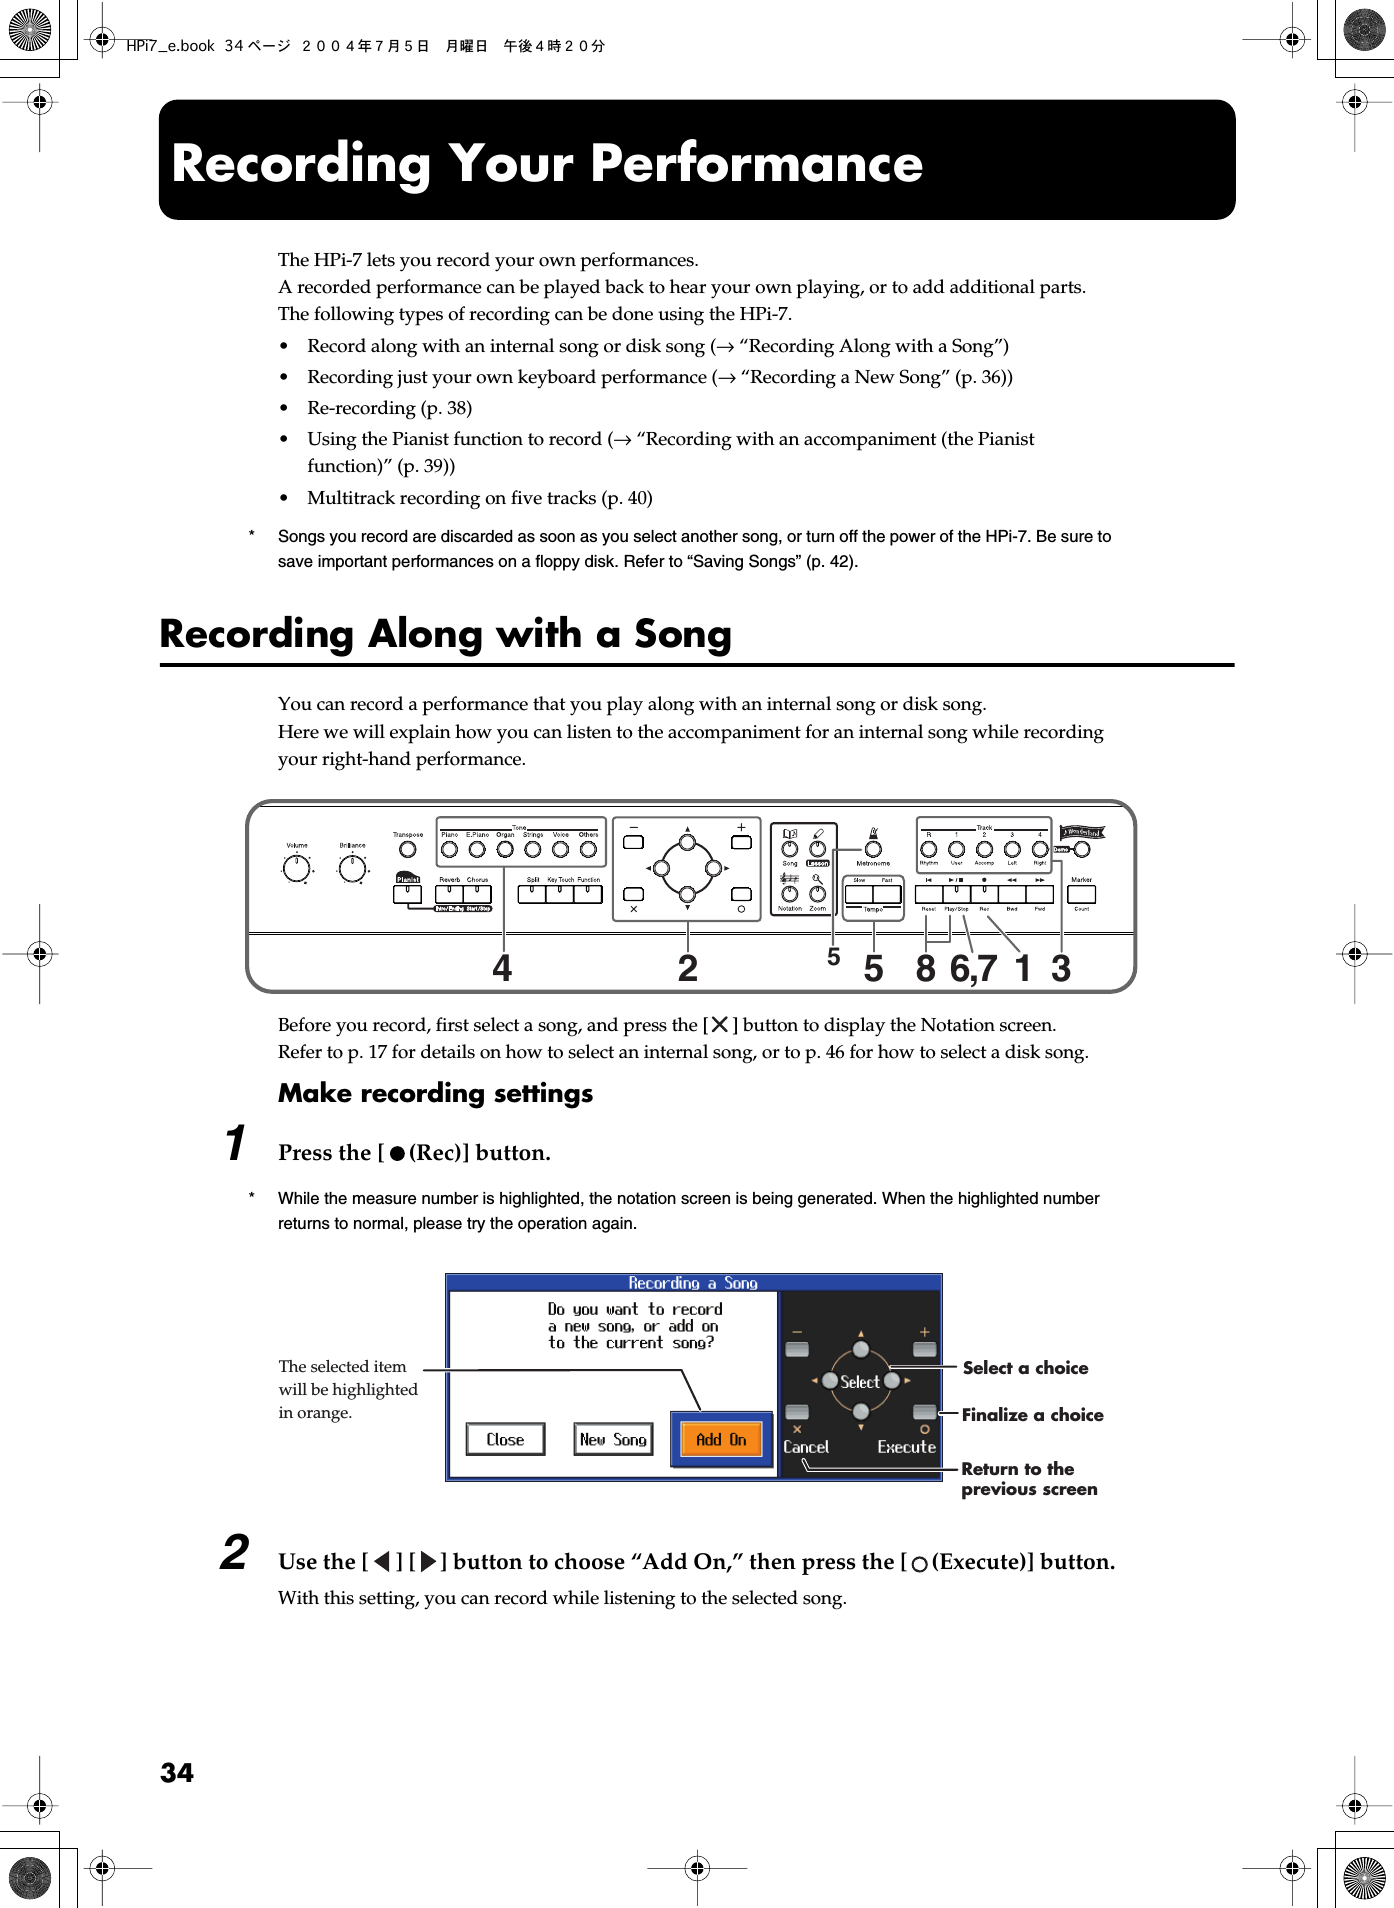  34 Recording Your Performance The HPi-7 lets you record your own performances.A recorded performance can be played back to hear your own playing, or to add additional parts.The following types of recording can be done using the HPi-7.• Record along with an internal song or disk song ( →  “Recording Along with a Song”)• Recording just your own keyboard performance ( →  “Recording a New Song” (p. 36))• Re-recording (p. 38)• Using the Pianist function to record ( →  “Recording with an accompaniment (the Pianist function)” (p. 39))• Multitrack recording on five tracks (p. 40) *Songs you record are discarded as soon as you select another song, or turn off the power of the HPi-7. Be sure to save important performances on a floppy disk. Refer to “Saving Songs” (p. 42). Recording Along with a Song You can record a performance that you play along with an internal song or disk song.Here we will explain how you can listen to the accompaniment for an internal song while recording your right-hand performance. fig.panelovrec Before you record, first select a song, and press the [ ] button to display the Notation screen.Refer to p. 17 for details on how to select an internal song, or to p. 46 for how to select a disk song. Make recording settings 1 Press the [ (Rec)] button. * While the measure number is highlighted, the notation screen is being generated. When the highlighted number returns to normal, please try the operation again. fig.recmsg1e 2 Use the [ ] [ ] button to choose “Add On,” then press the [ (Execute)] button. With this setting, you can record while listening to the selected song.4255316,78The selected item will be highlighted in orange. Finalize a choiceReturn to the previous screenSelect a choiceHPi7_e.book 34 ページ ２００４年７月５日　月曜日　午後４時２０分